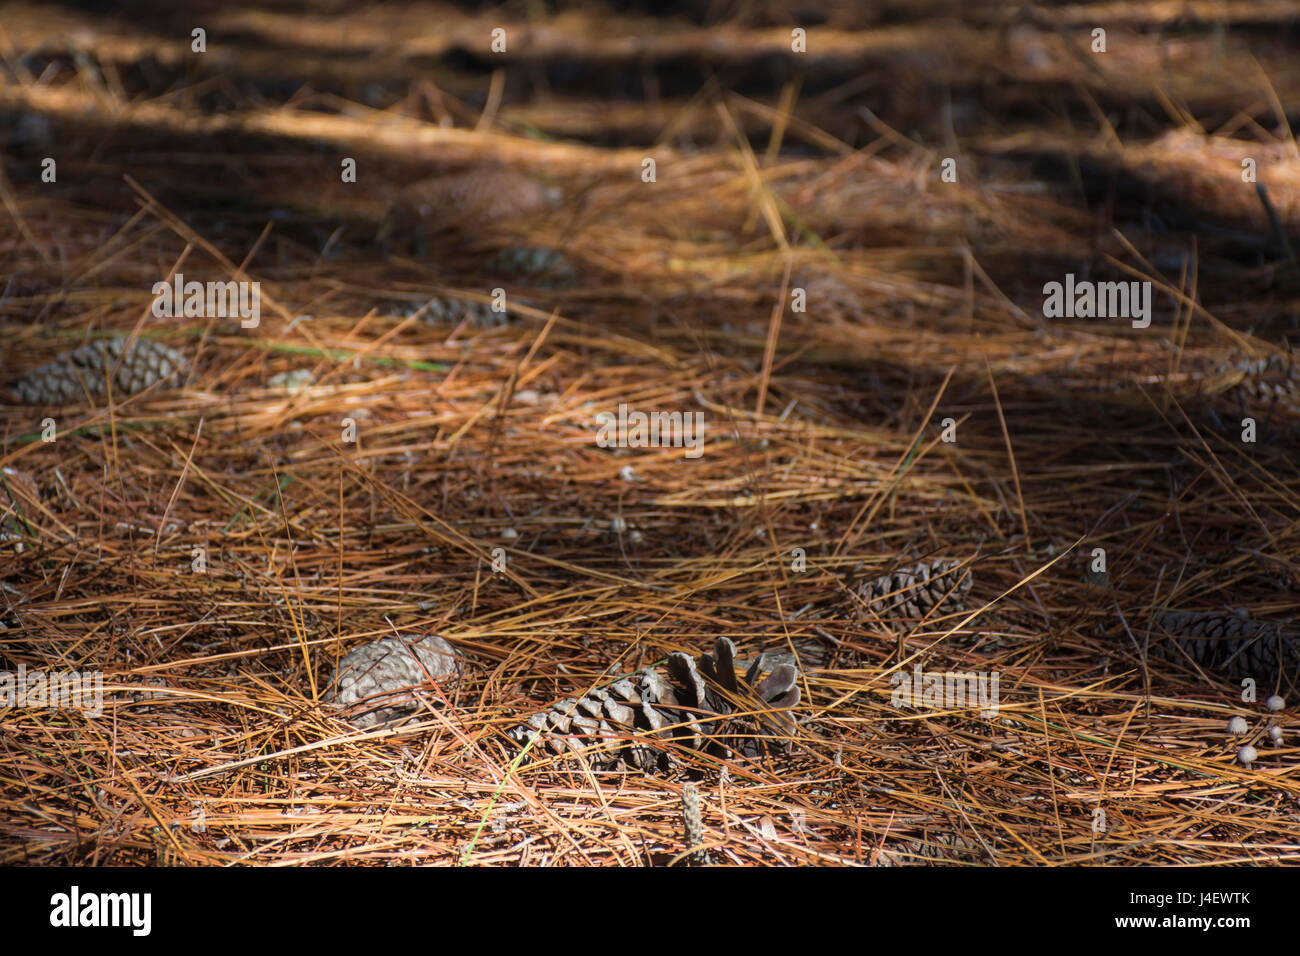 Pine cones and pine needles on the ground in a forest Stock Photo